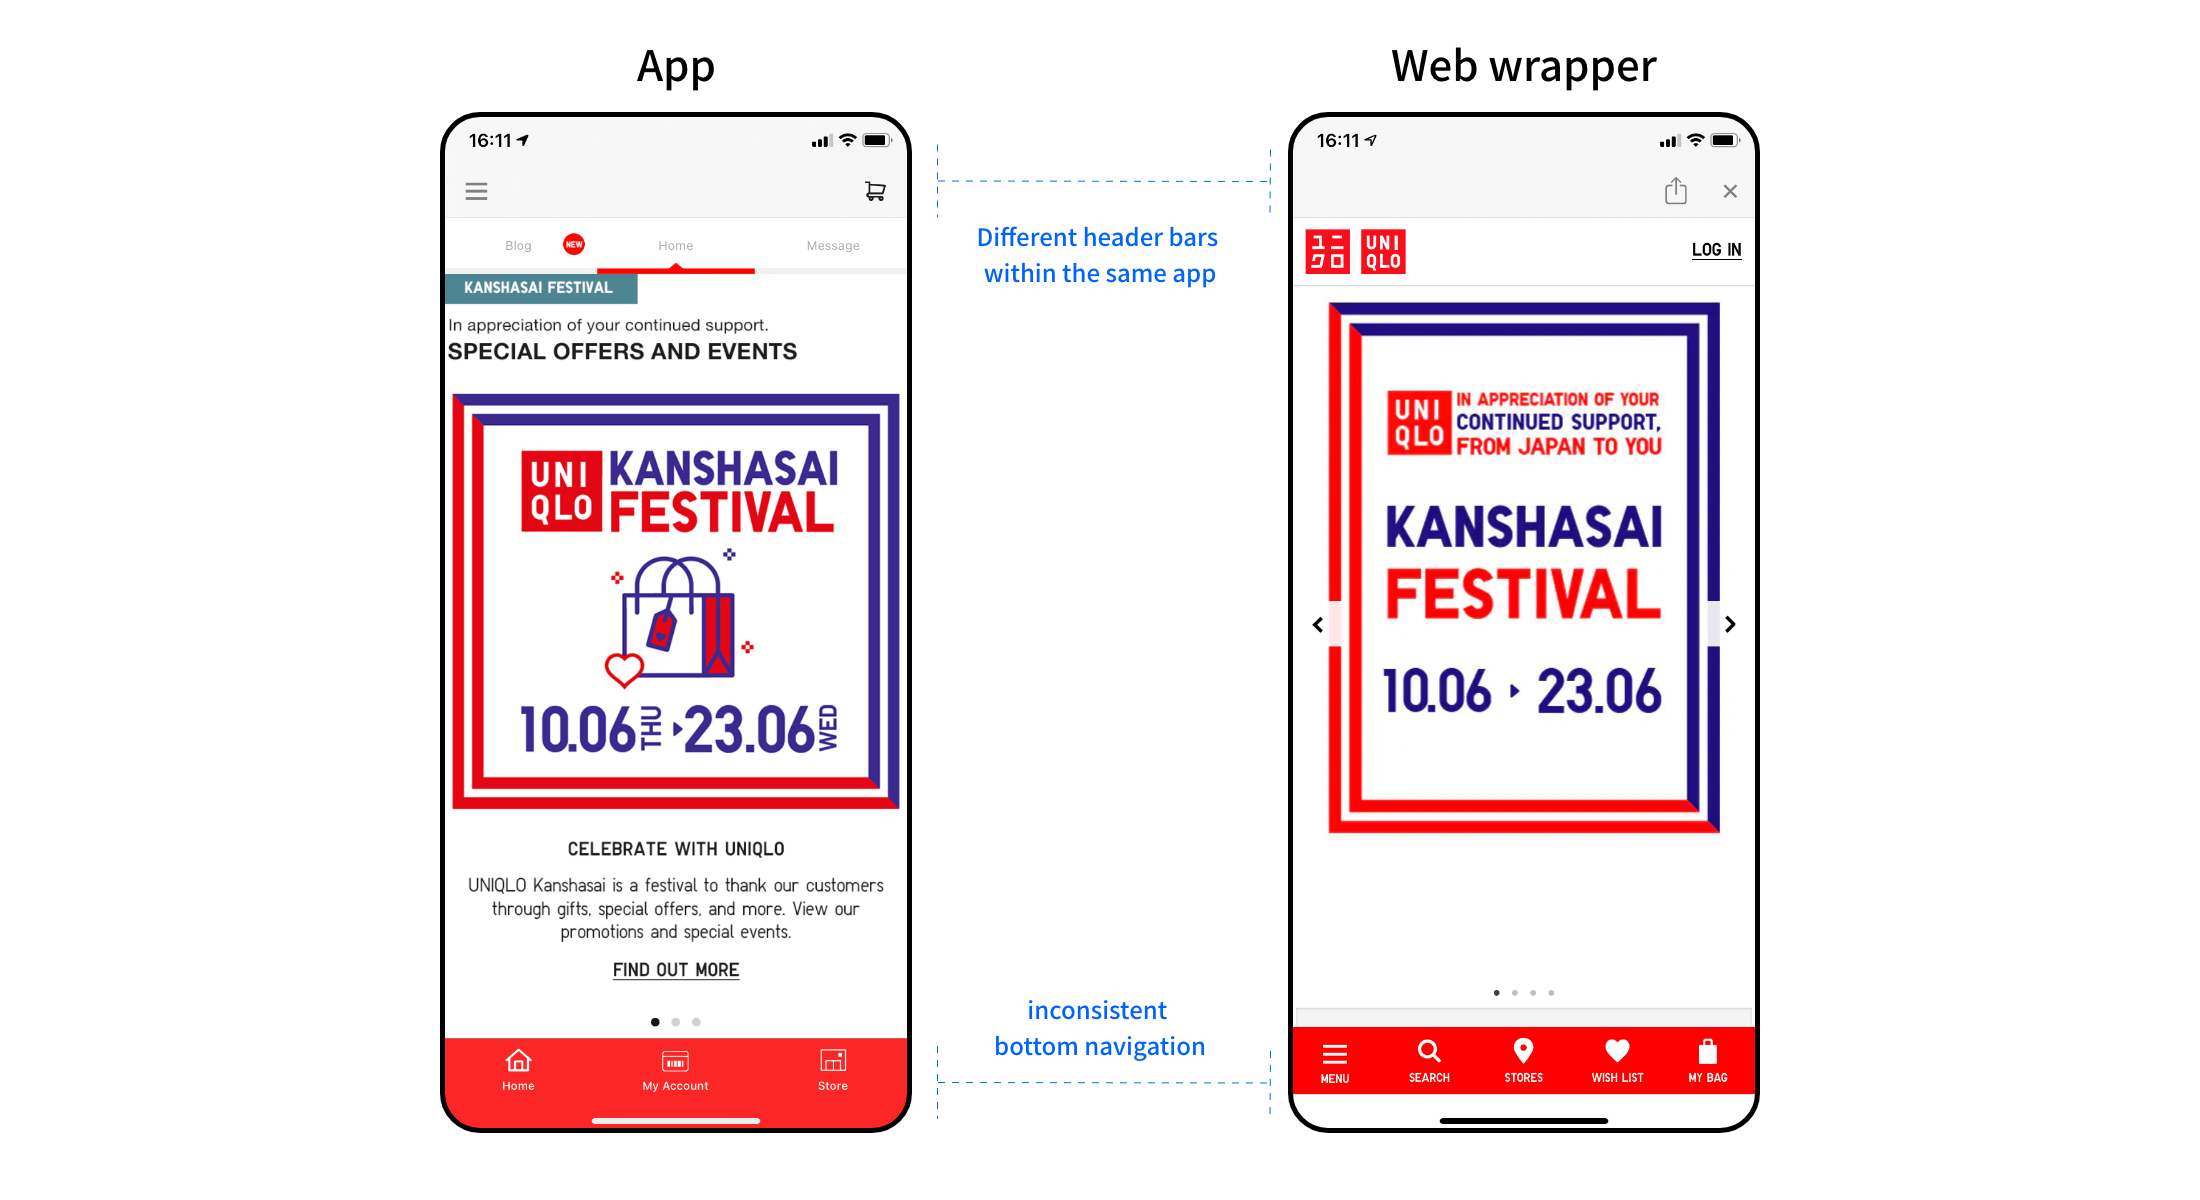 Difference between app and web-wrapper interface